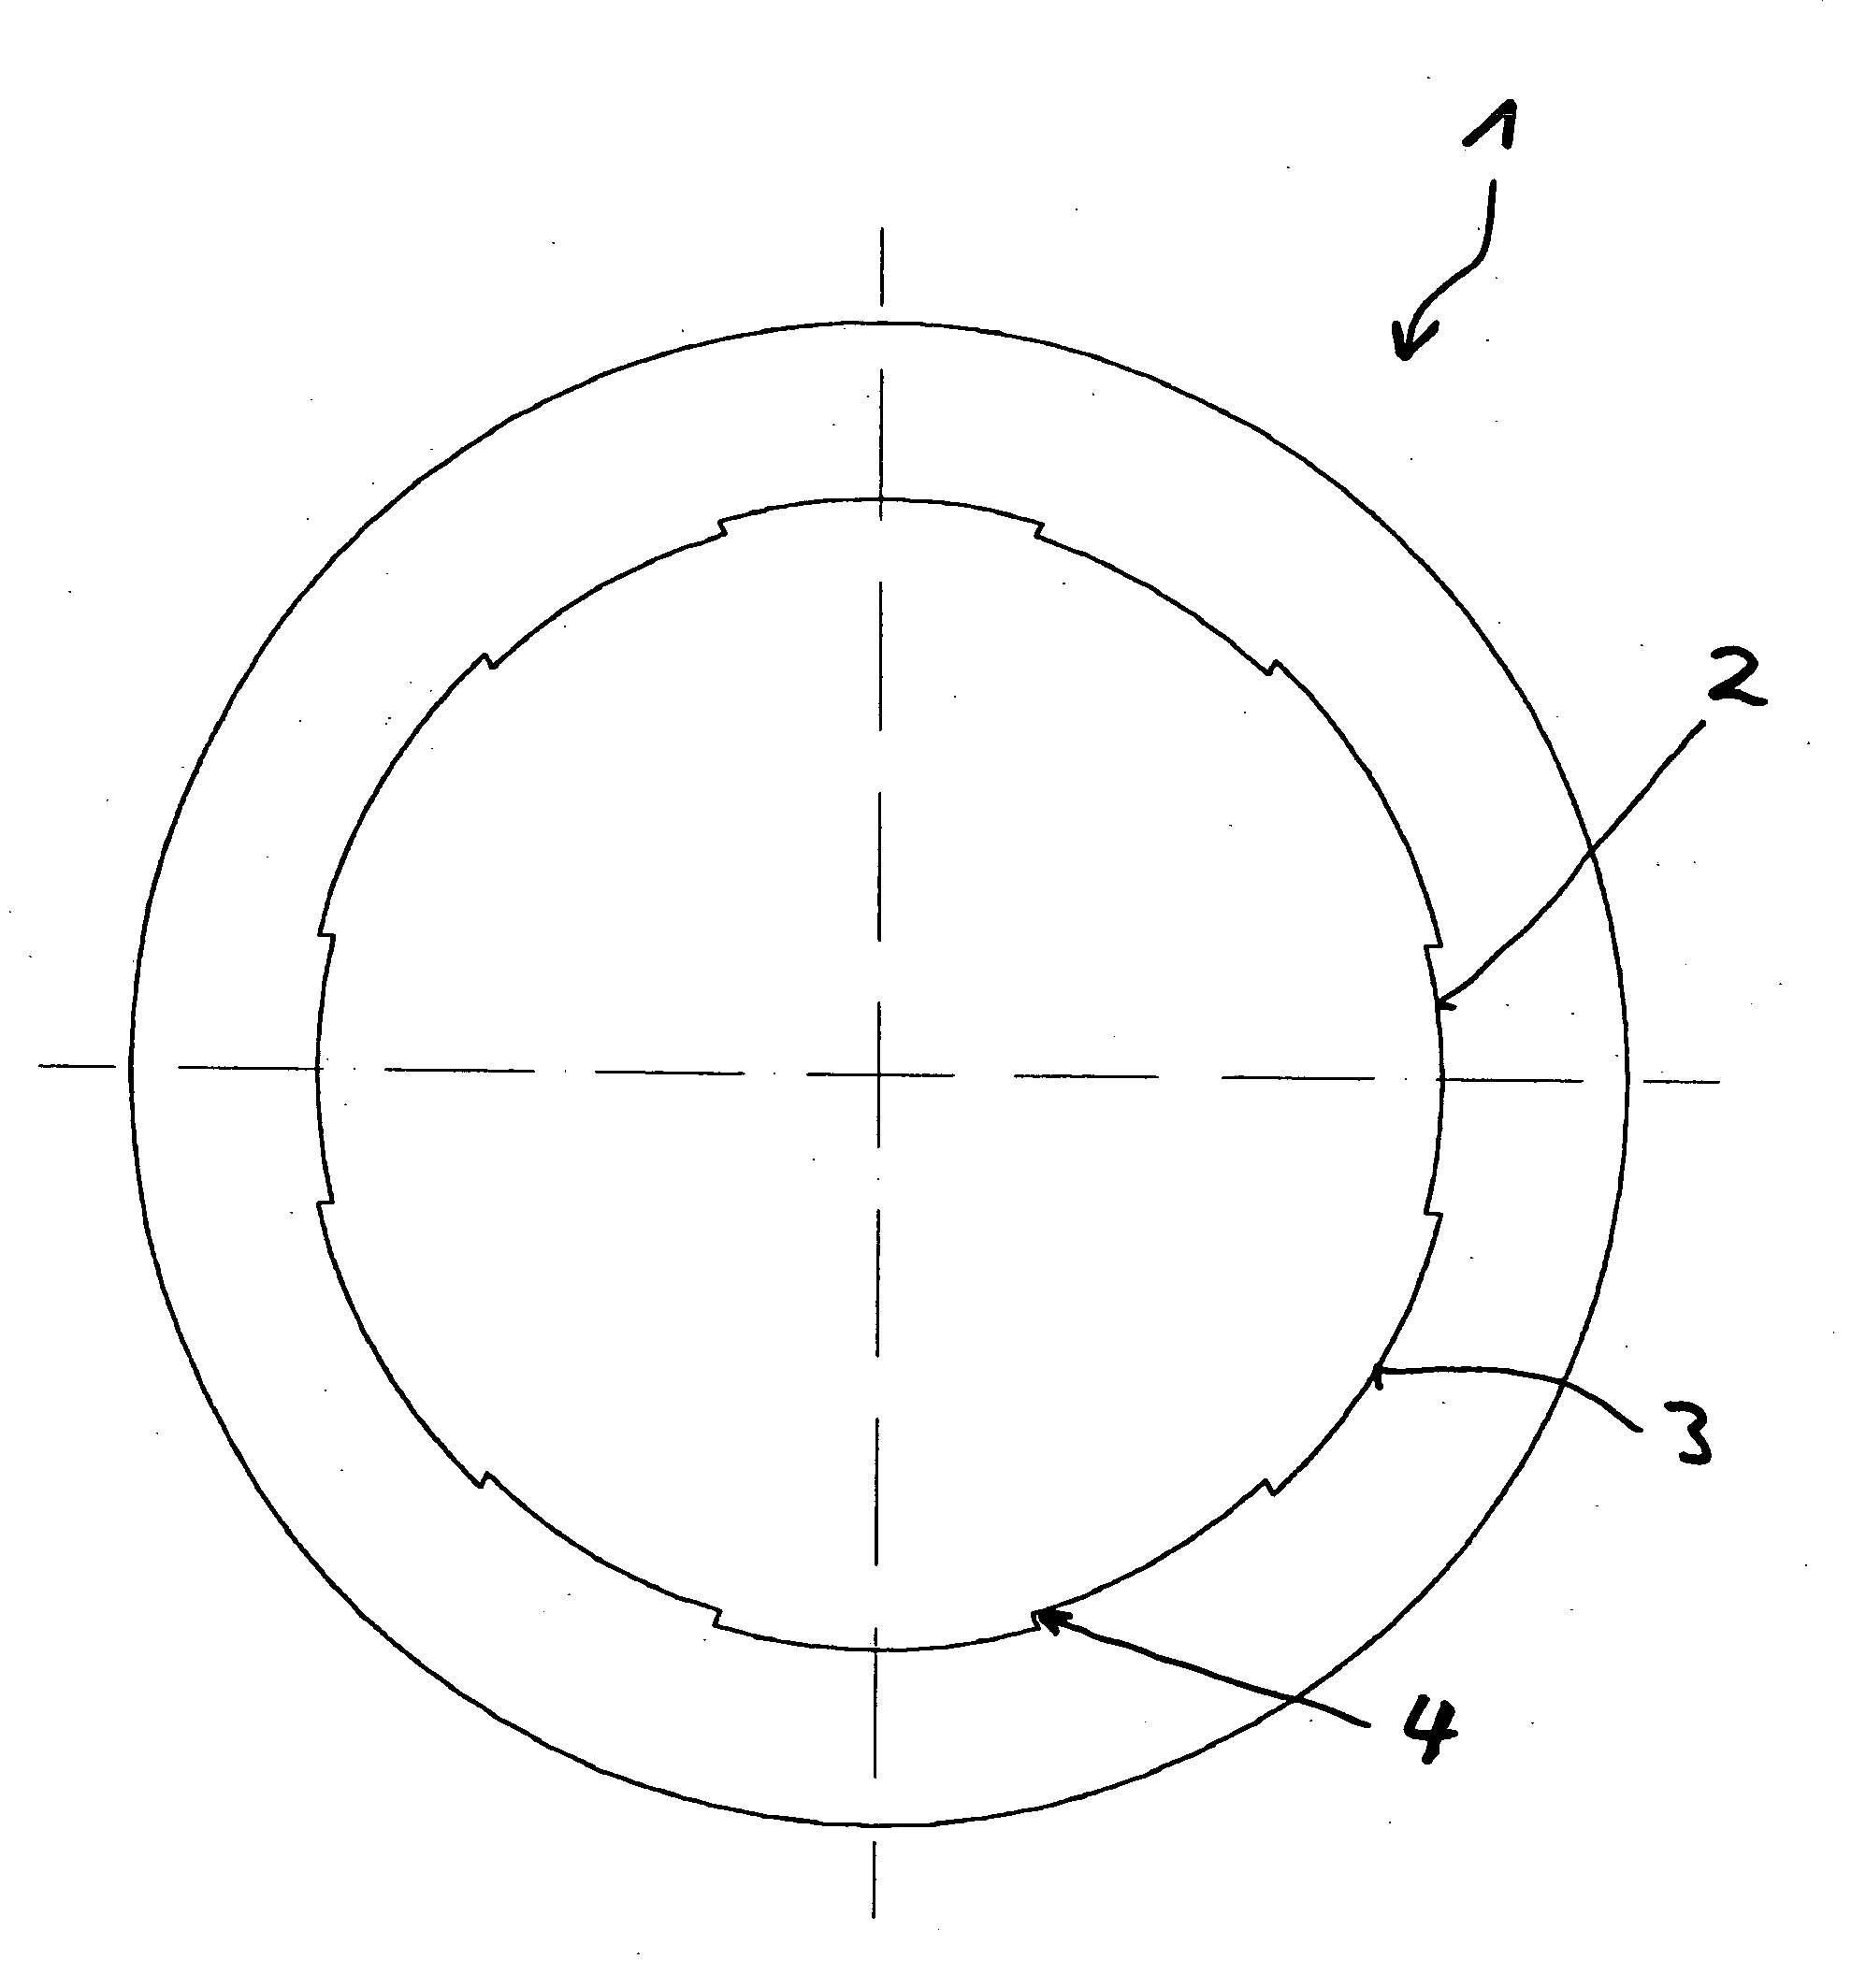 Porous plain bearing with continuous variation of the borehole compression